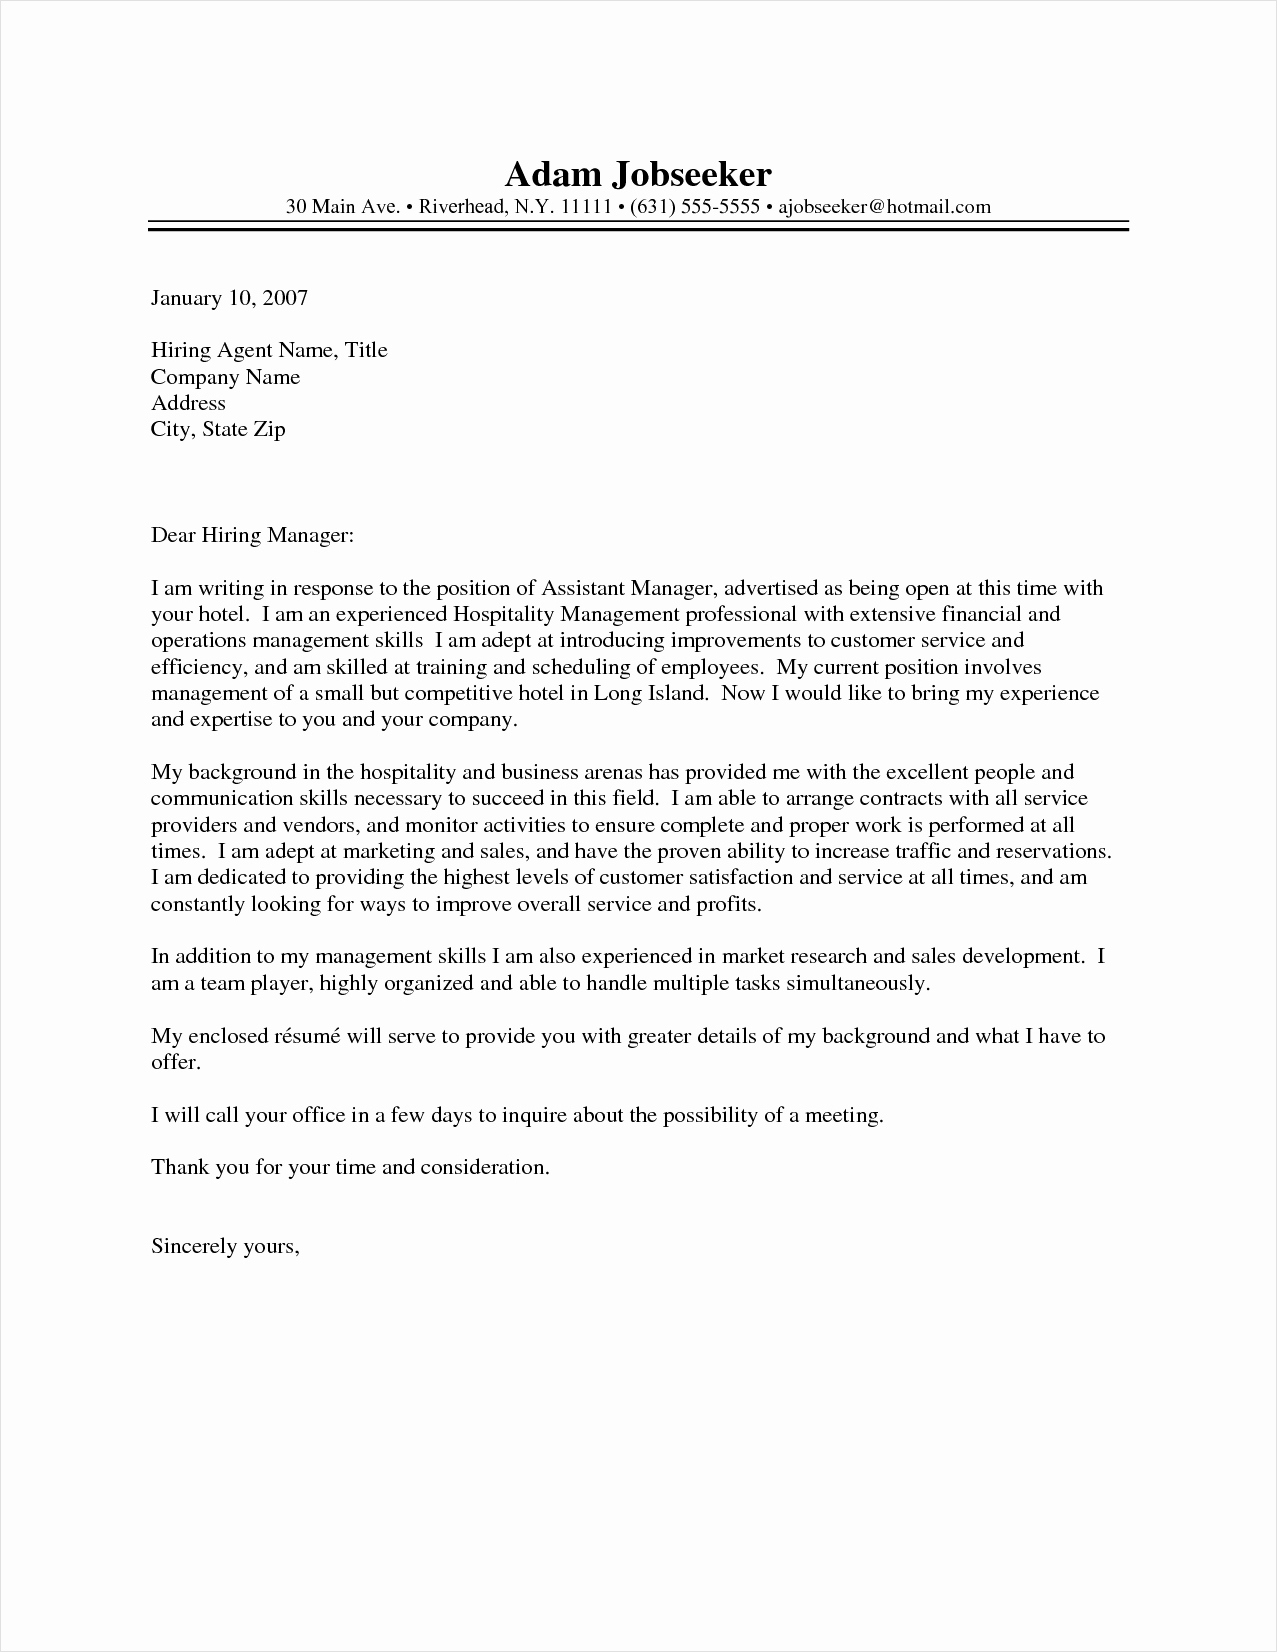 hospitality industry cover letter template